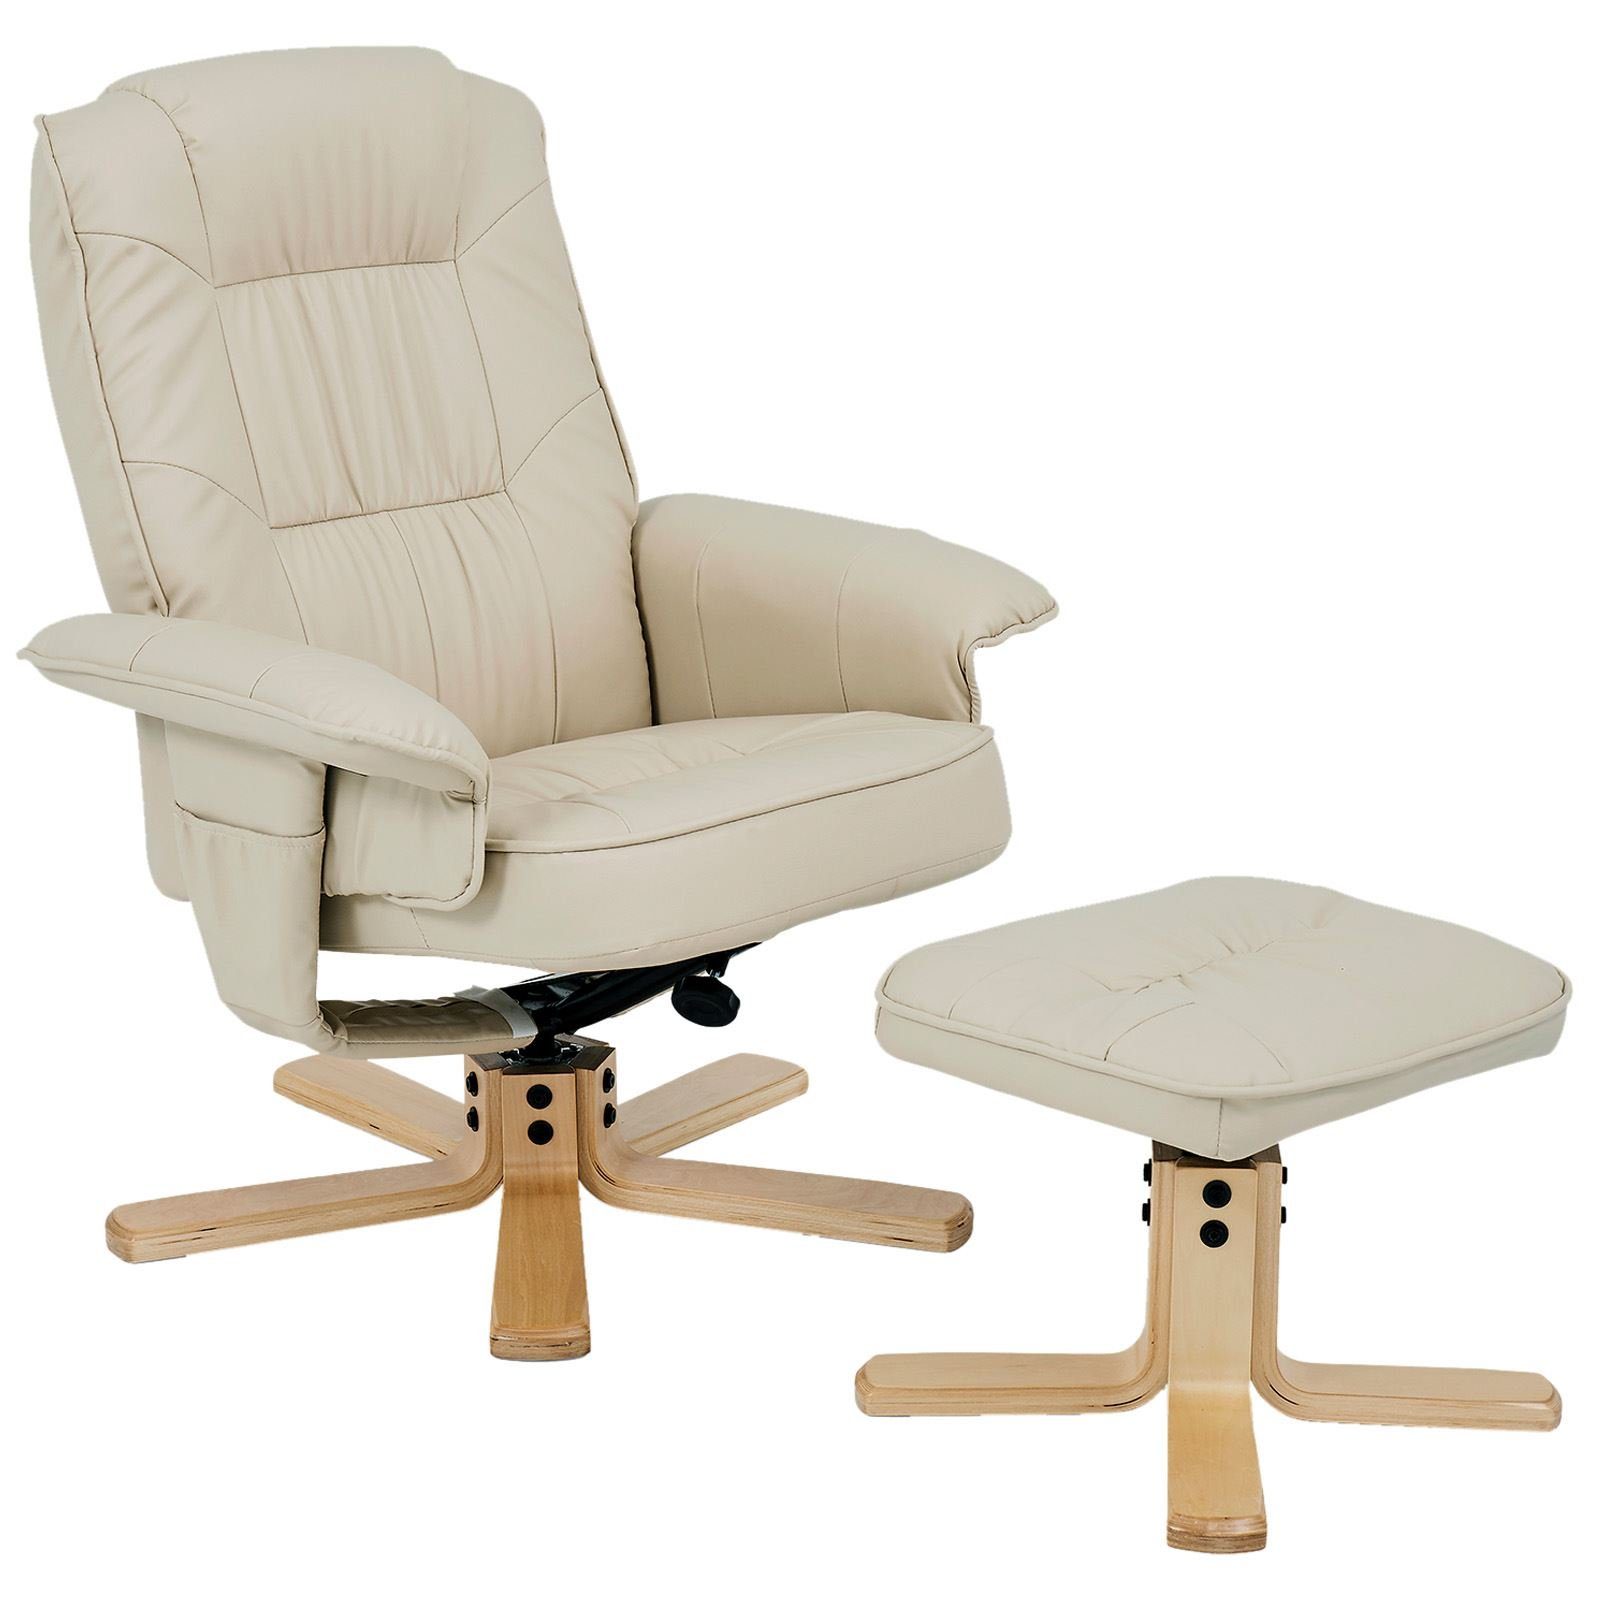 IDIMEX Relaxsessel CHARLY, Relaxsessel mit Hocker, Fernsehsessel, Drehsessel, Polstersessel in be beige